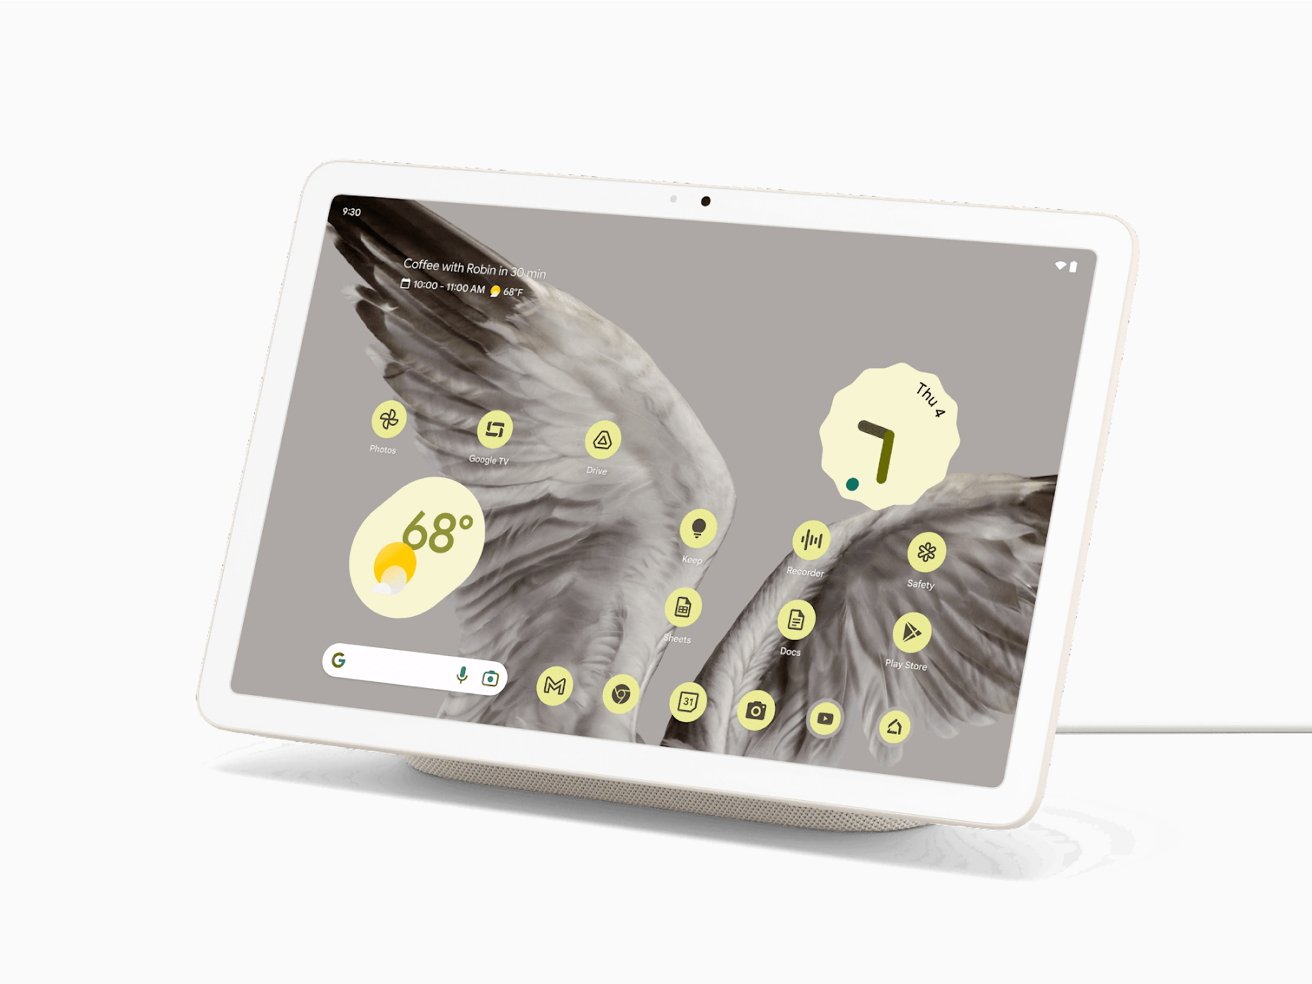 Google's Pixel Tablet shares some visual attributes with the iPad 10